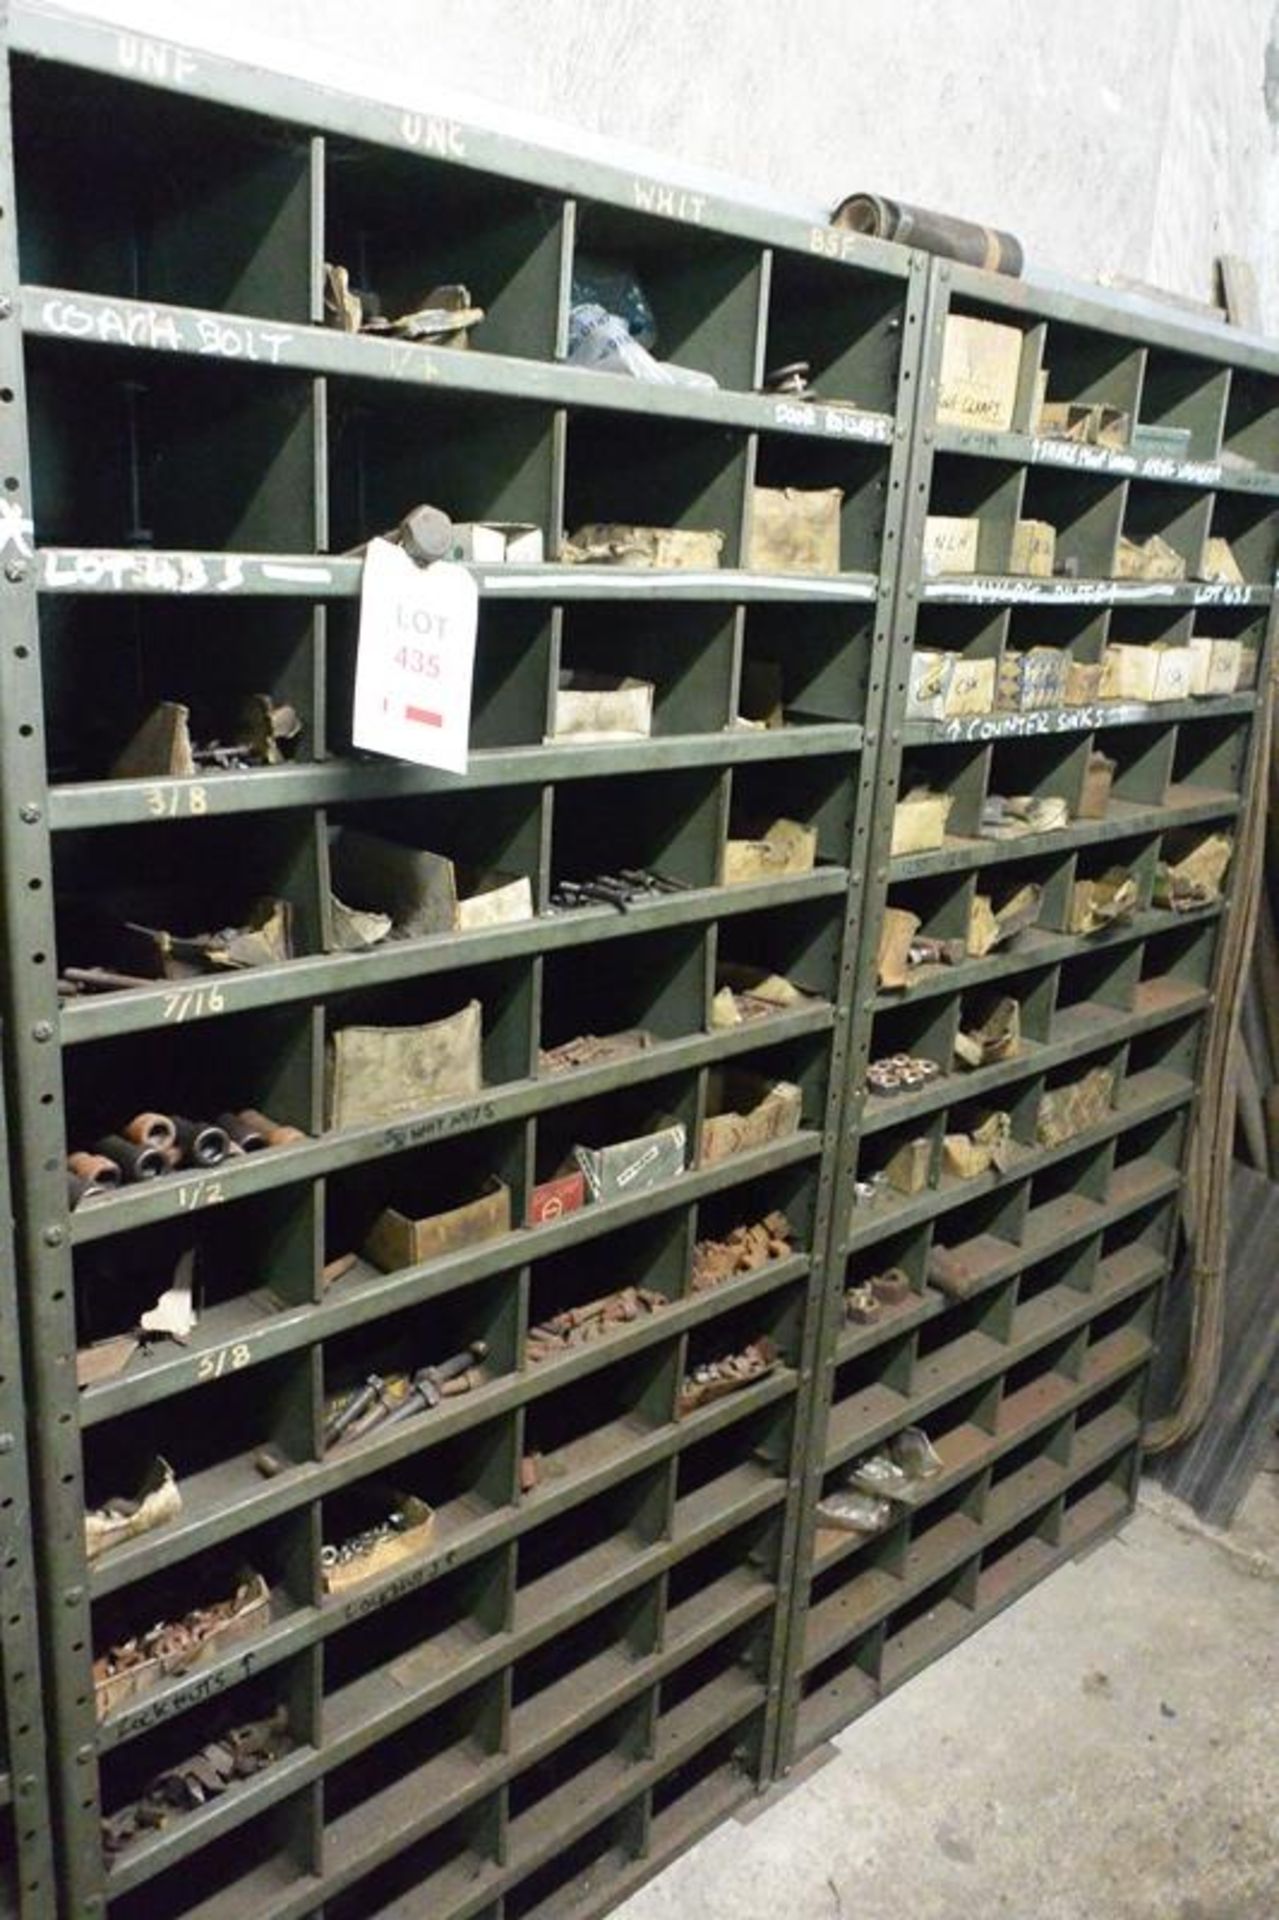 Contents of two bays of racking incl. various nuts, bolts, rollers, washers, etc. (as lotted) (